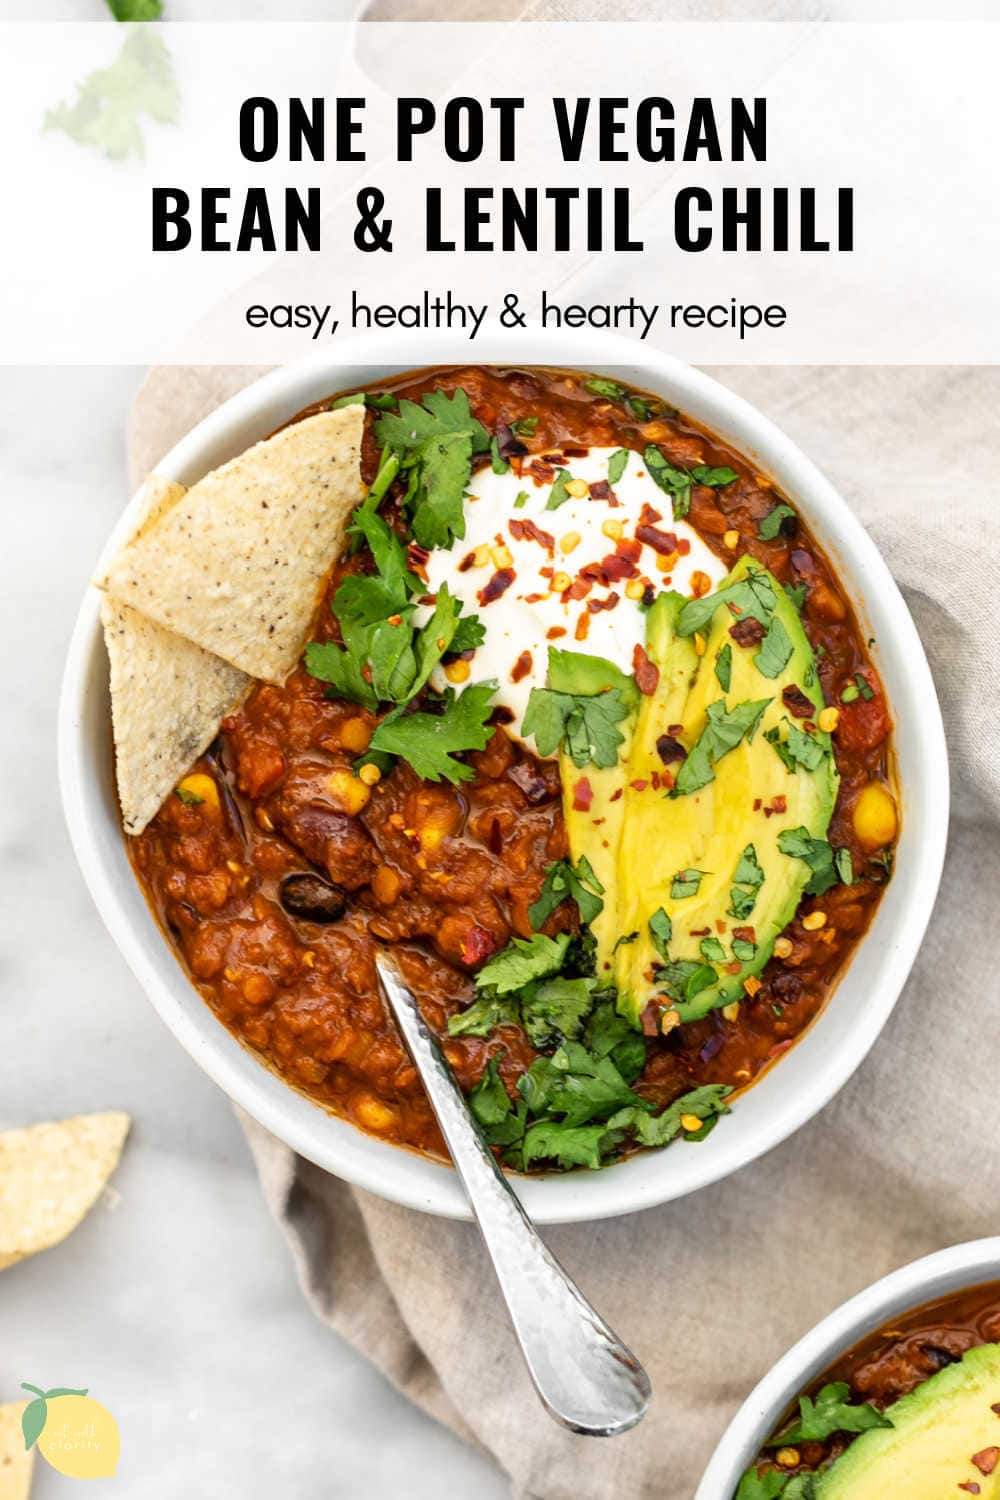 One Pot Vegan Lentil Chili | Eat With Clarity Mains